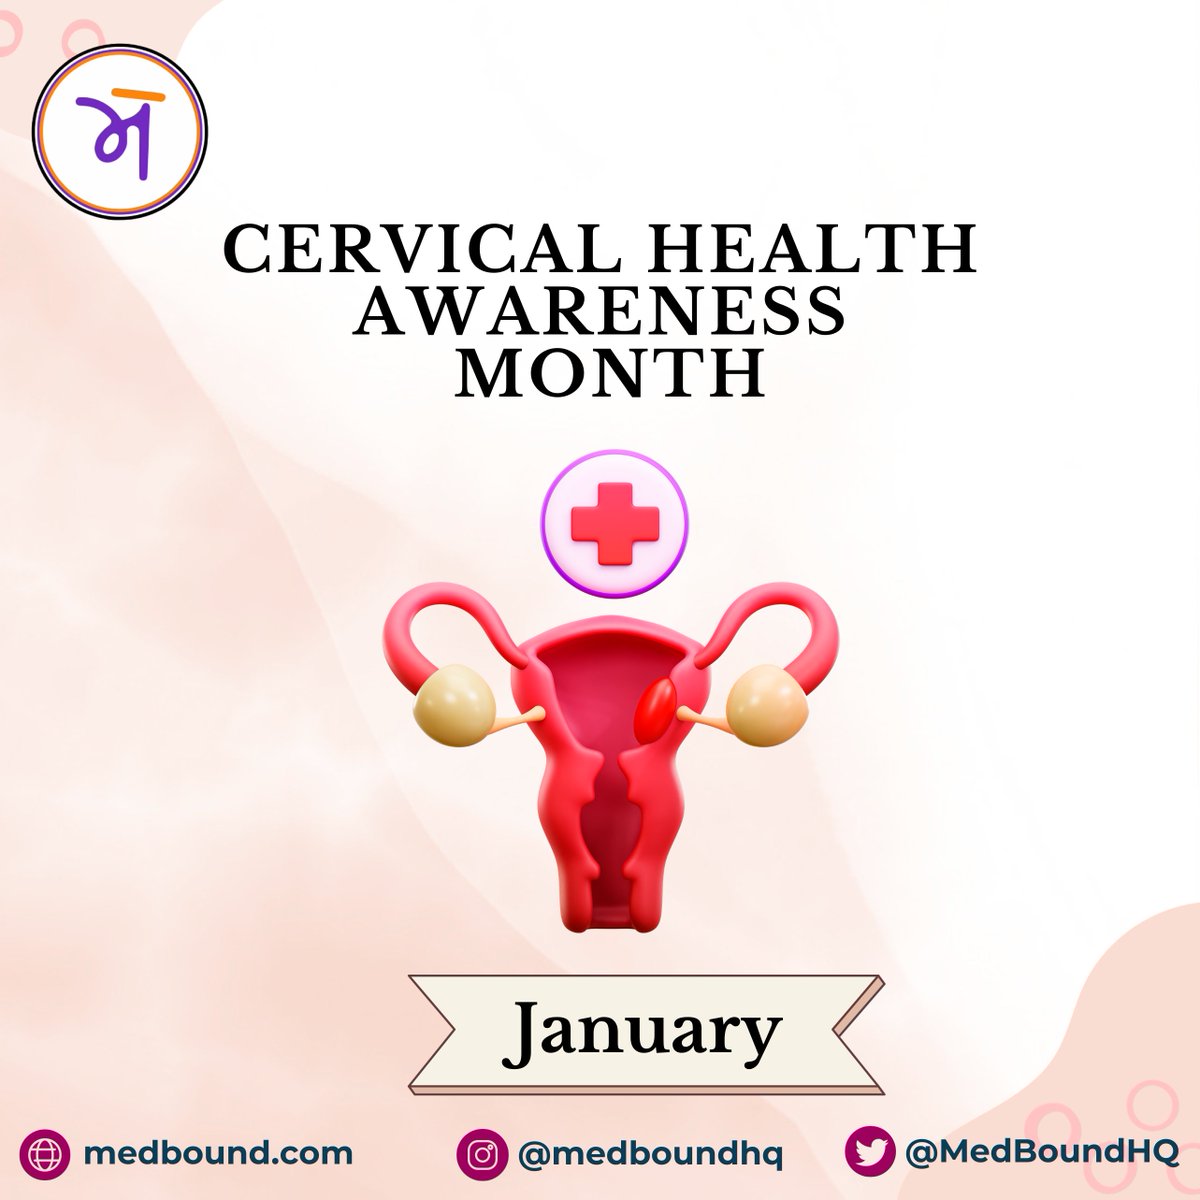 Screening saves lives! Regular Pap smears and HPV tests are essential for early detection of cervical abnormalities. Make your health a priority this #CervicalHealthAwarenessMonth. 

Check out this article by @medboundtimes: What's the Connection Between HPV and Cervical Cancer?…